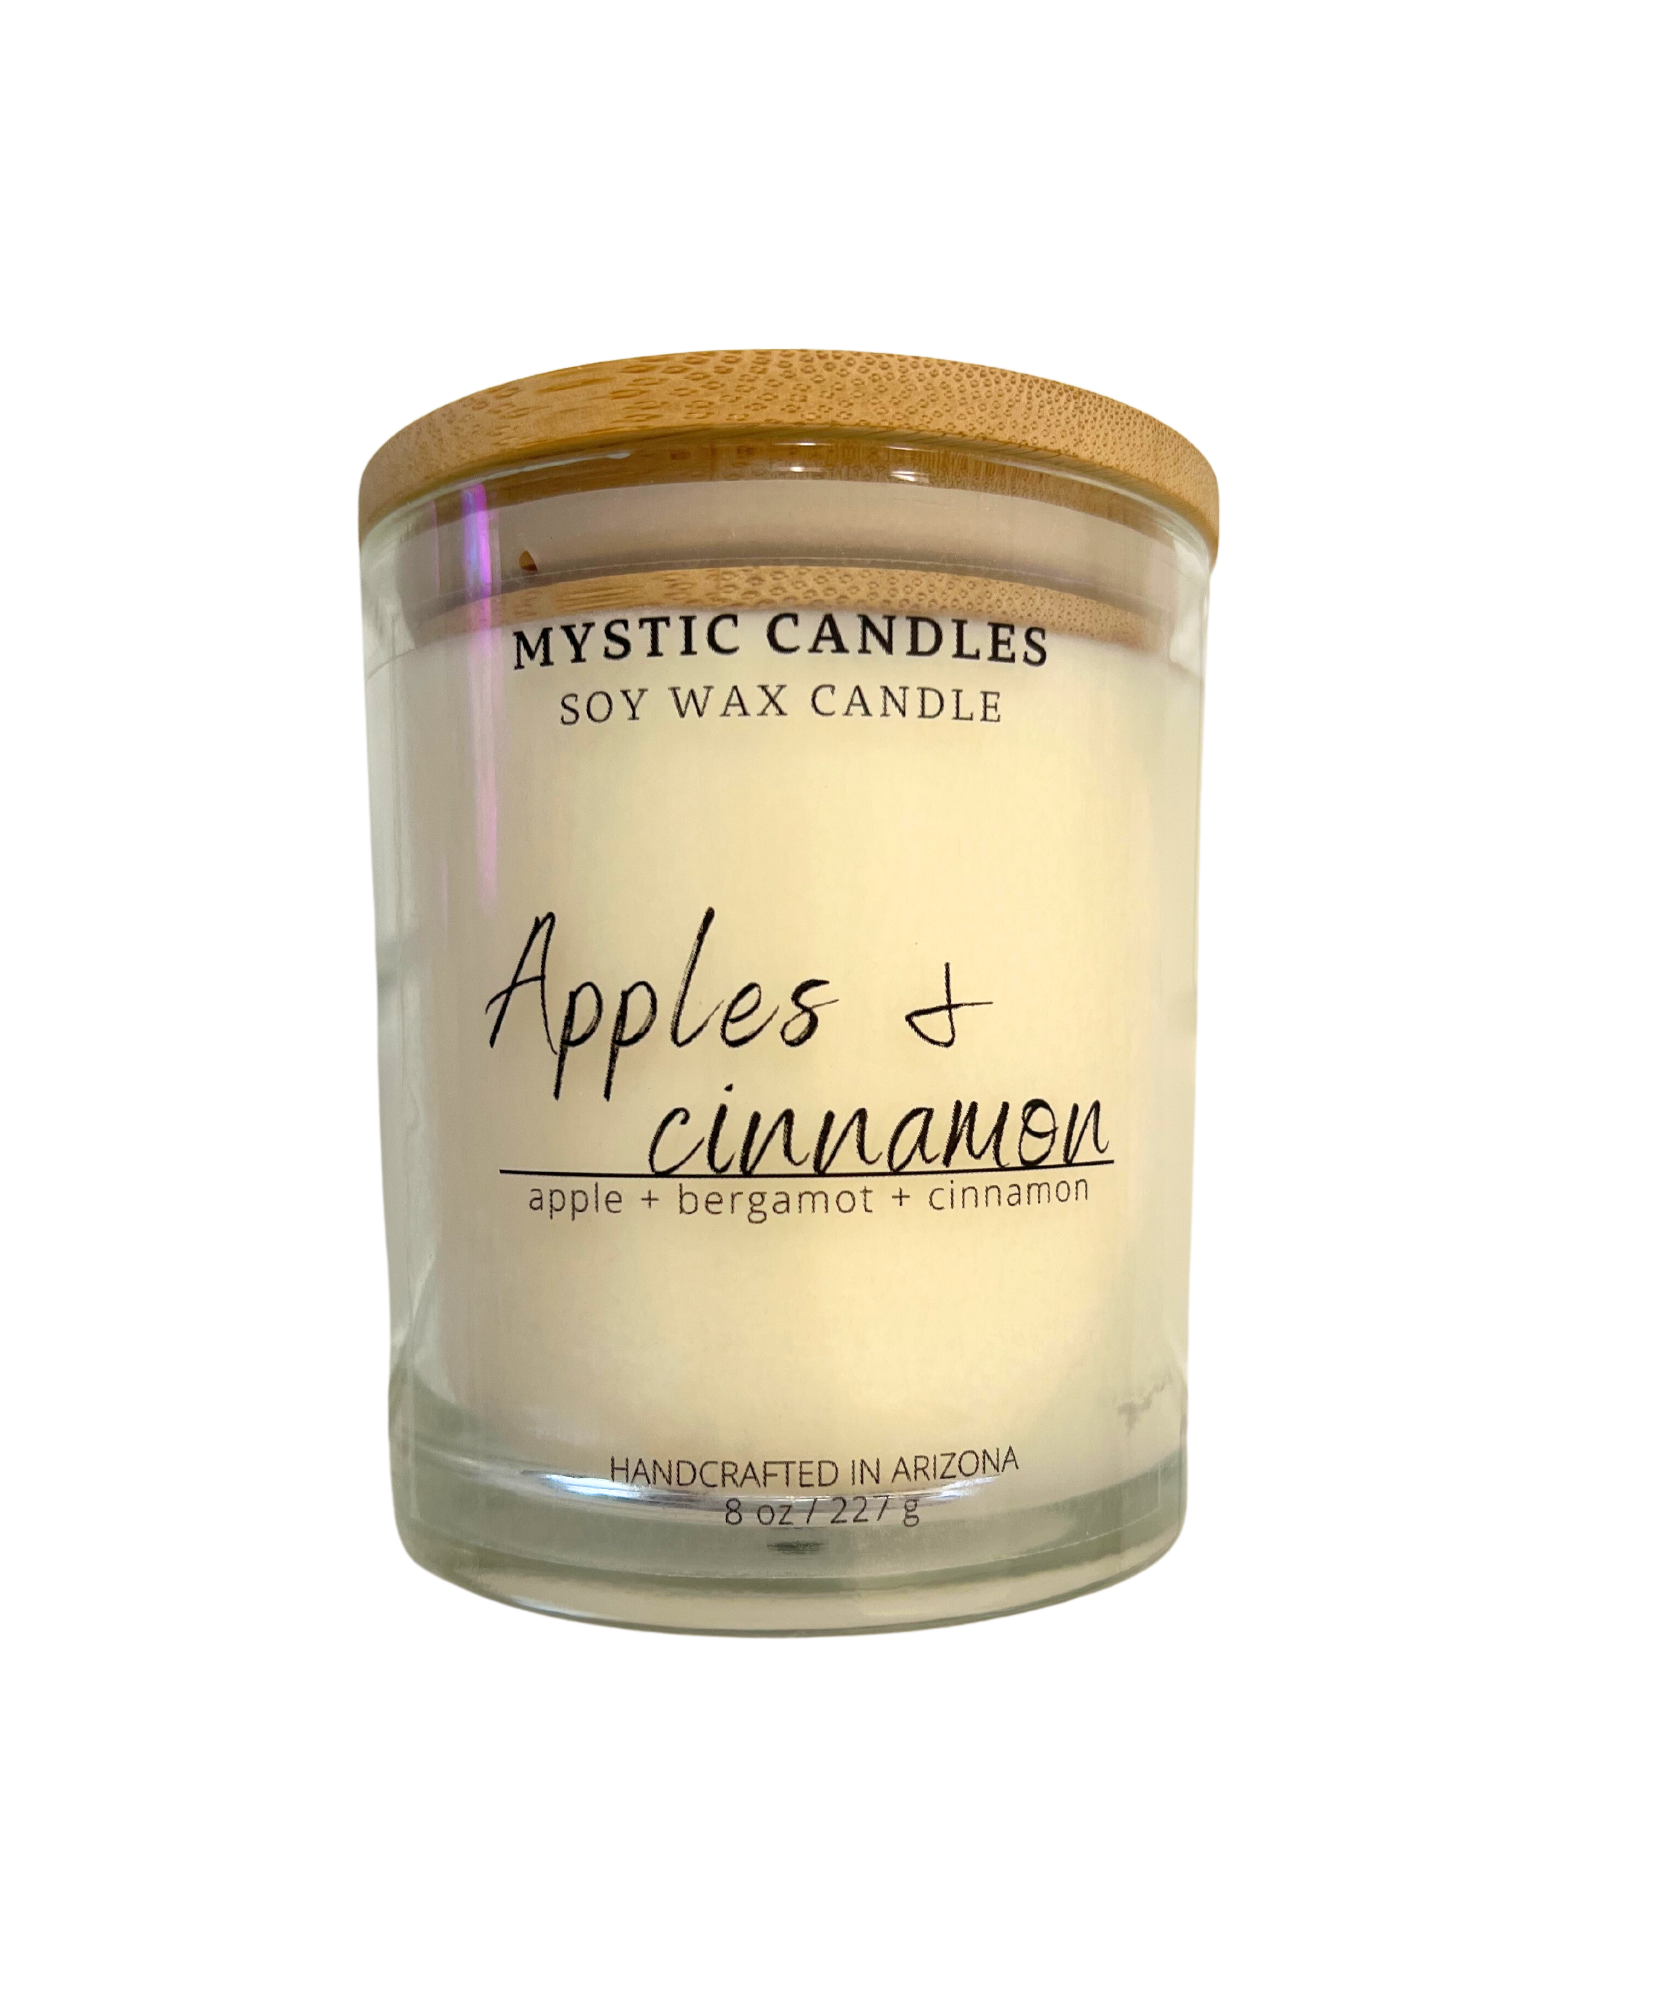 Apple & Cinnamon Candle - Mystic Candles